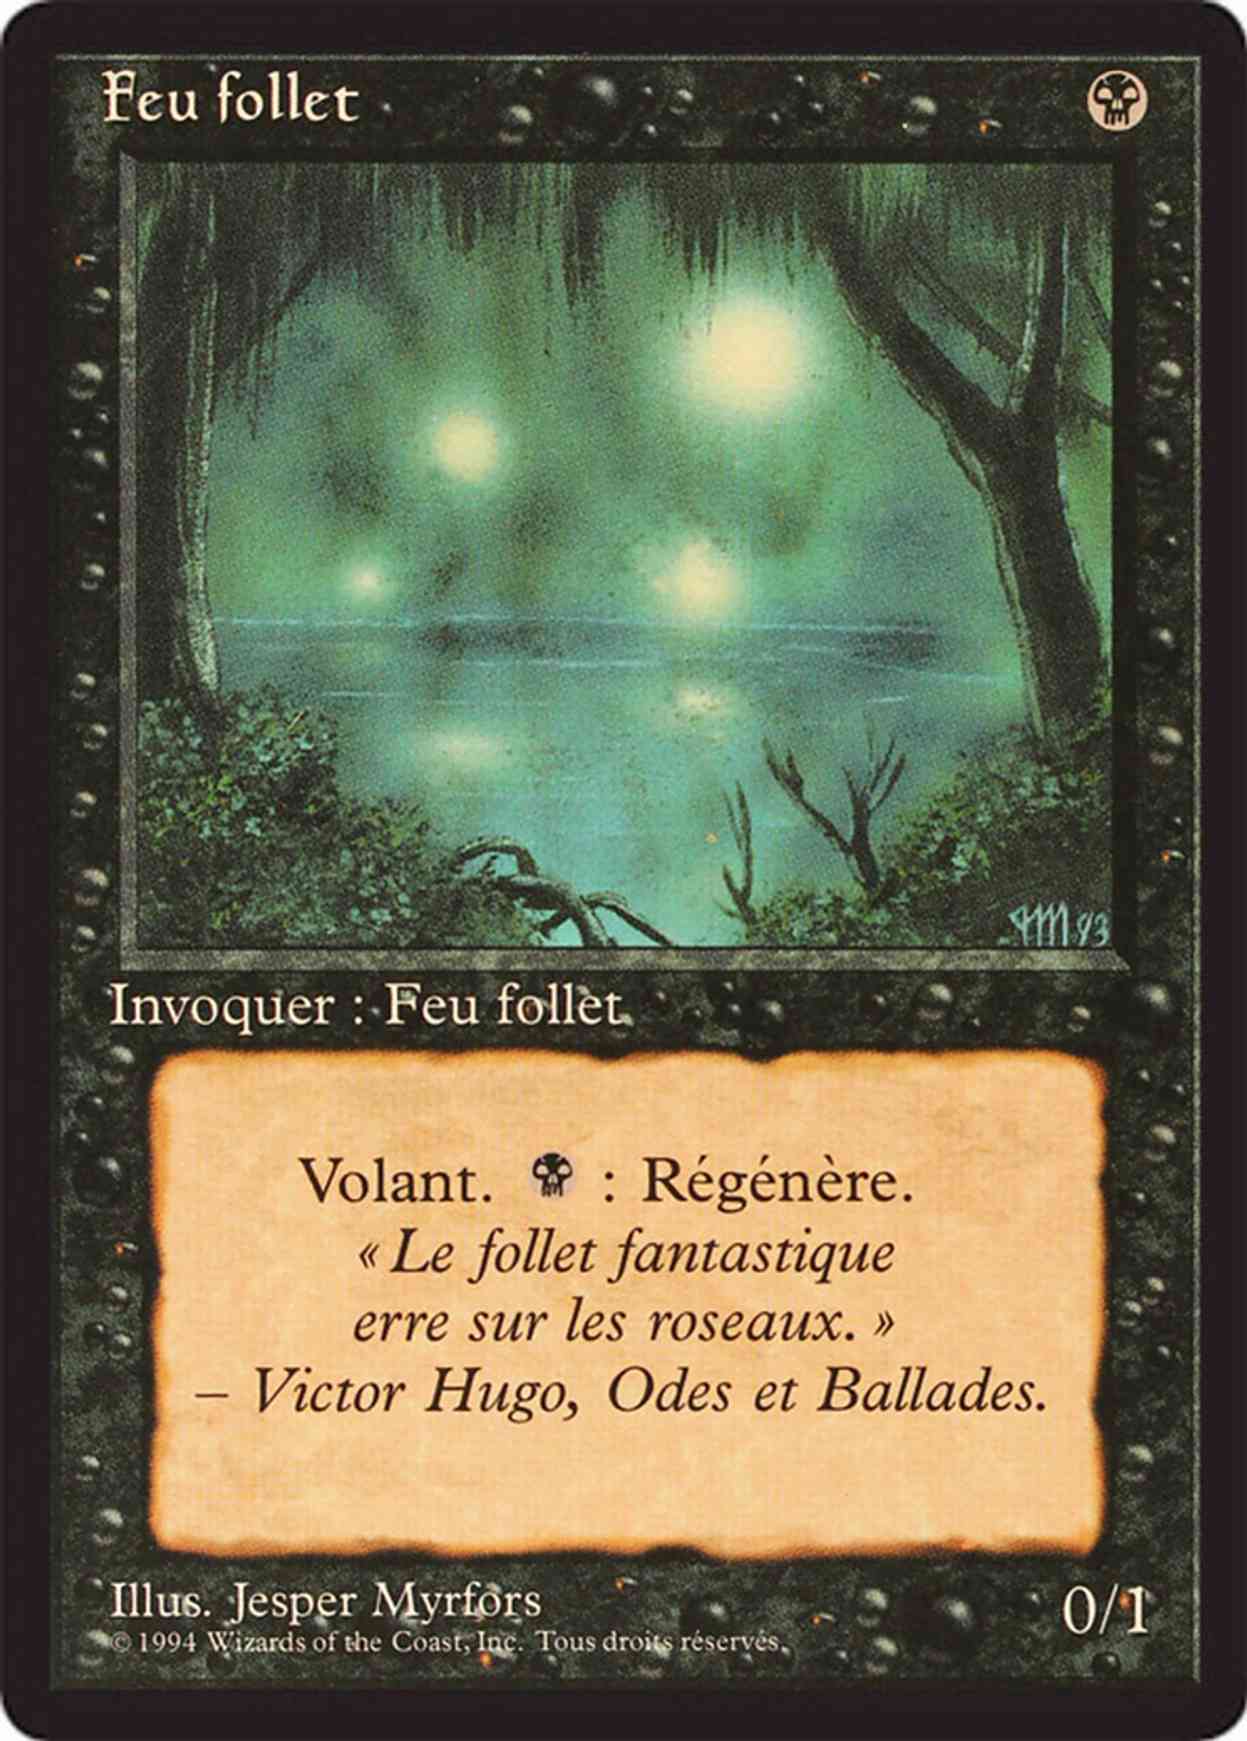 Will-o'-the-Wisp magic card front